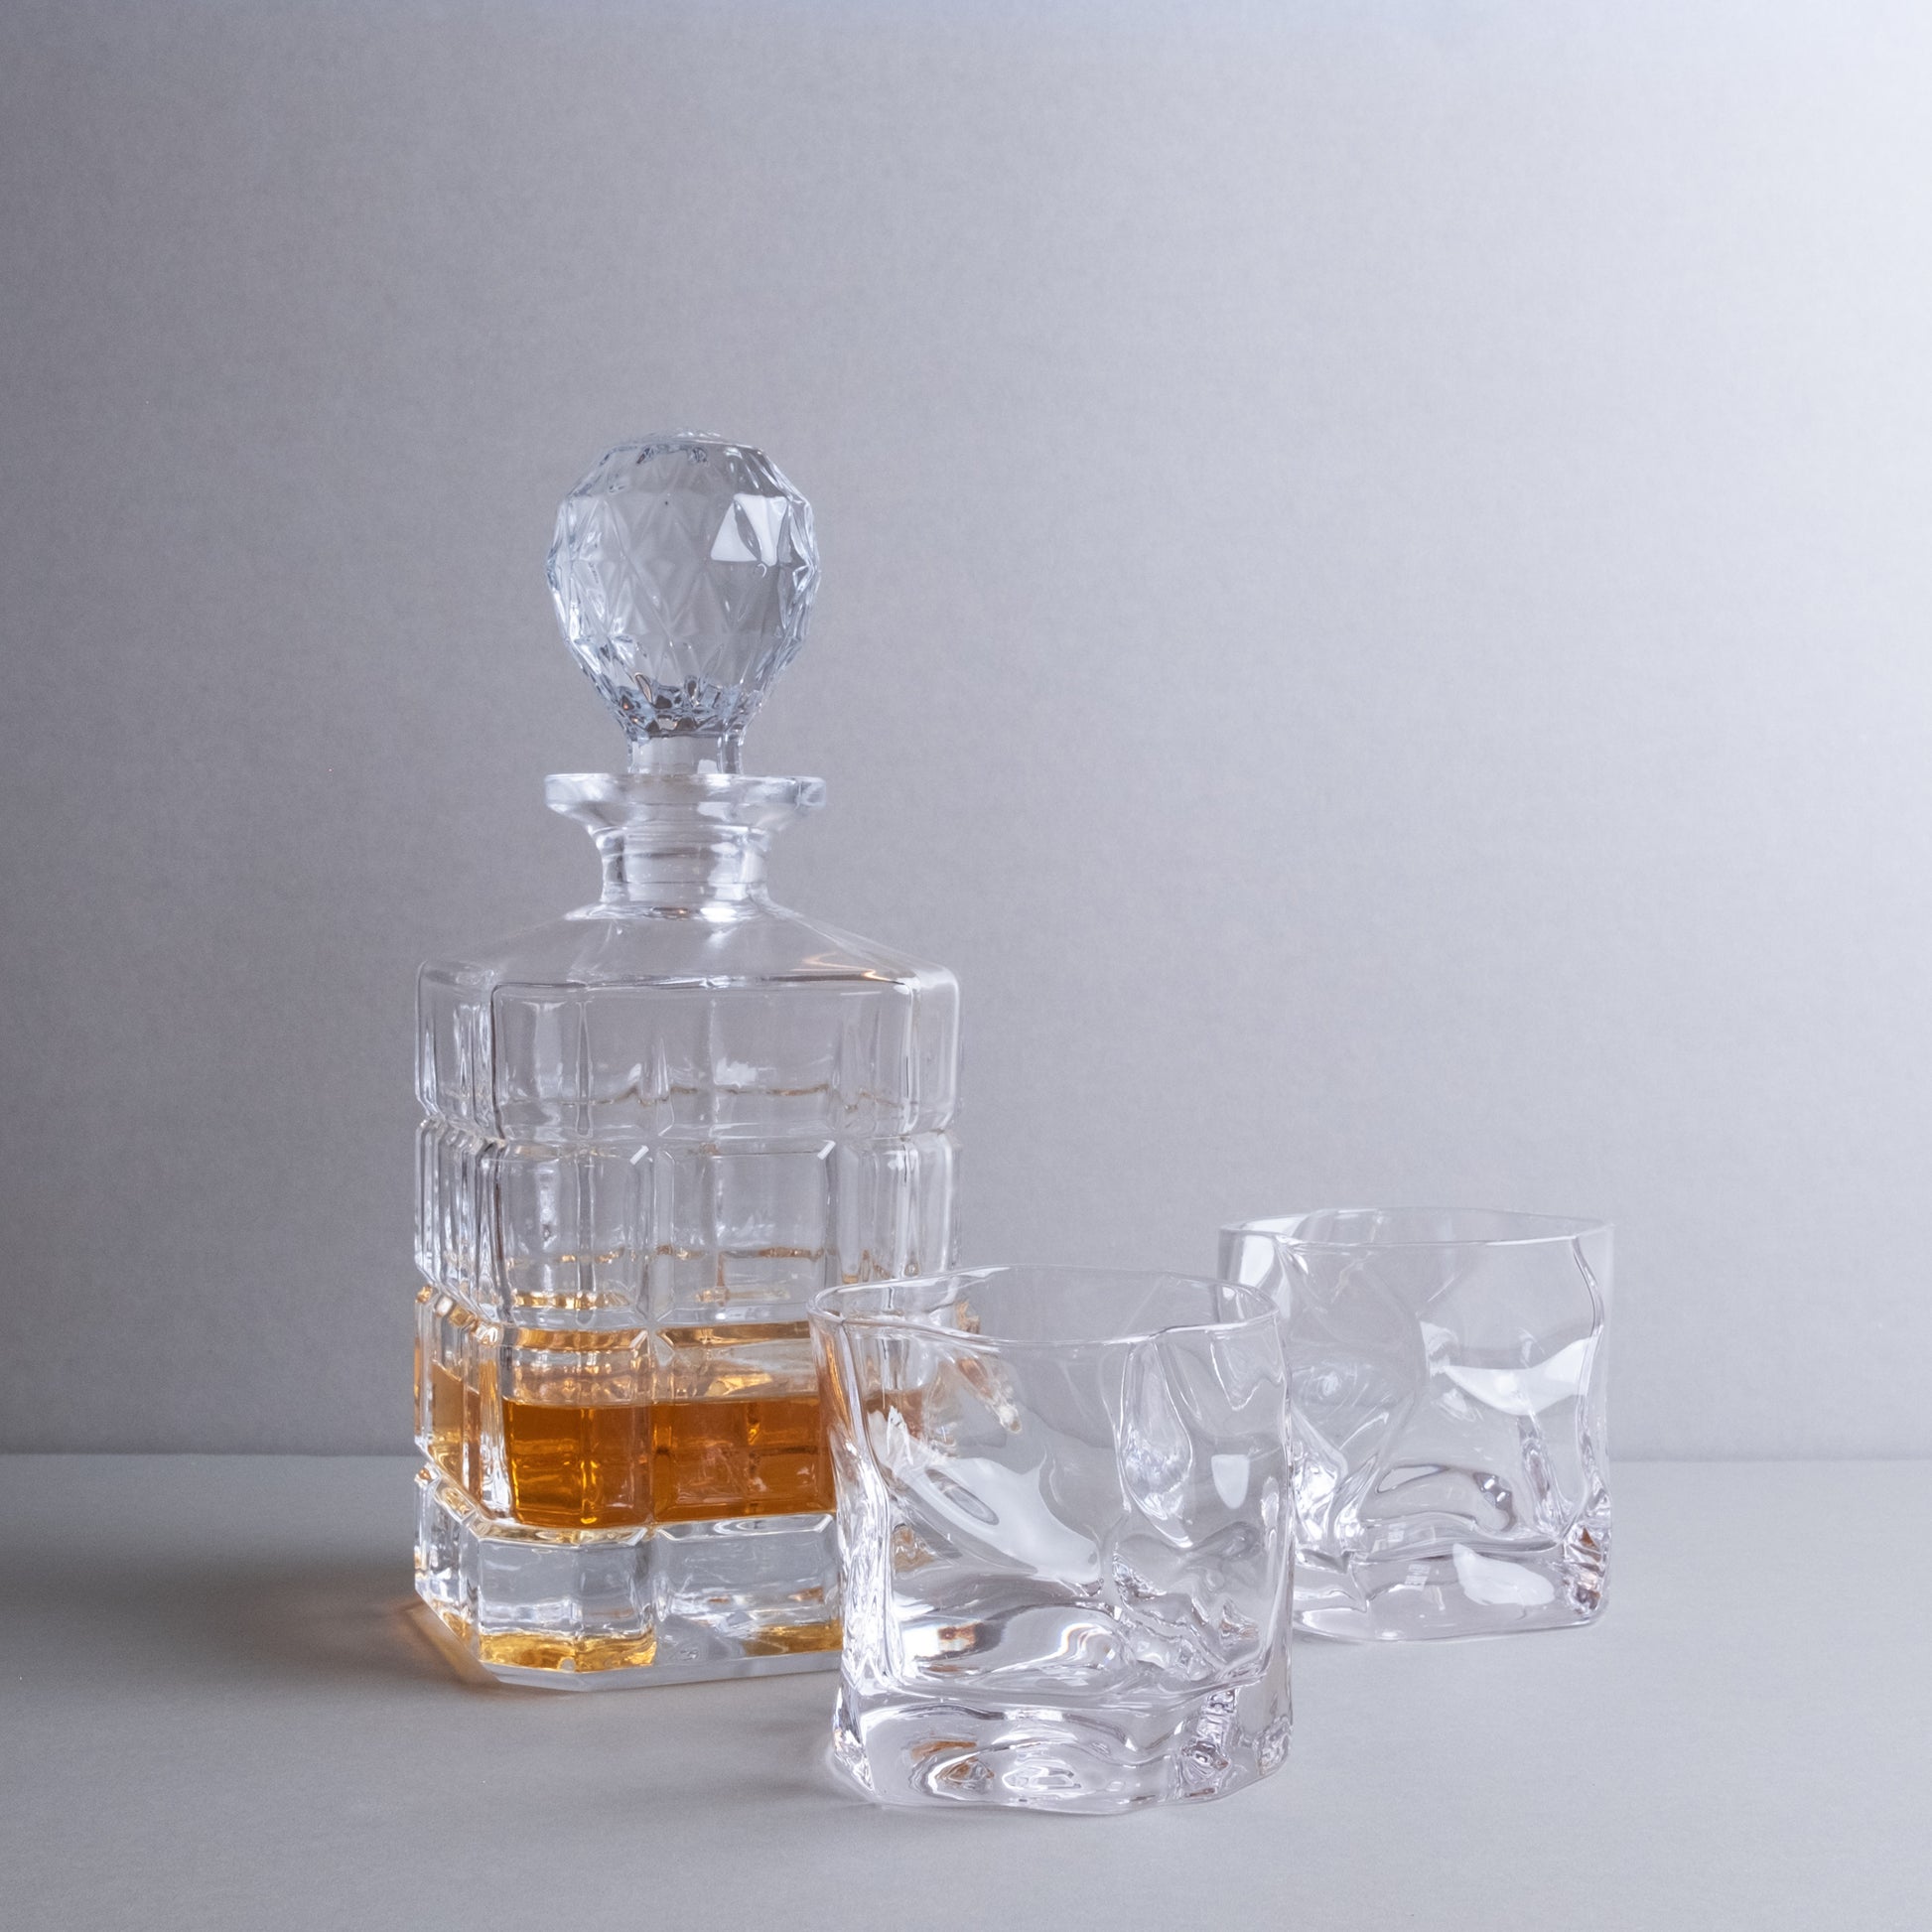 M&B Vaucluse Crystal Whisky Decanter